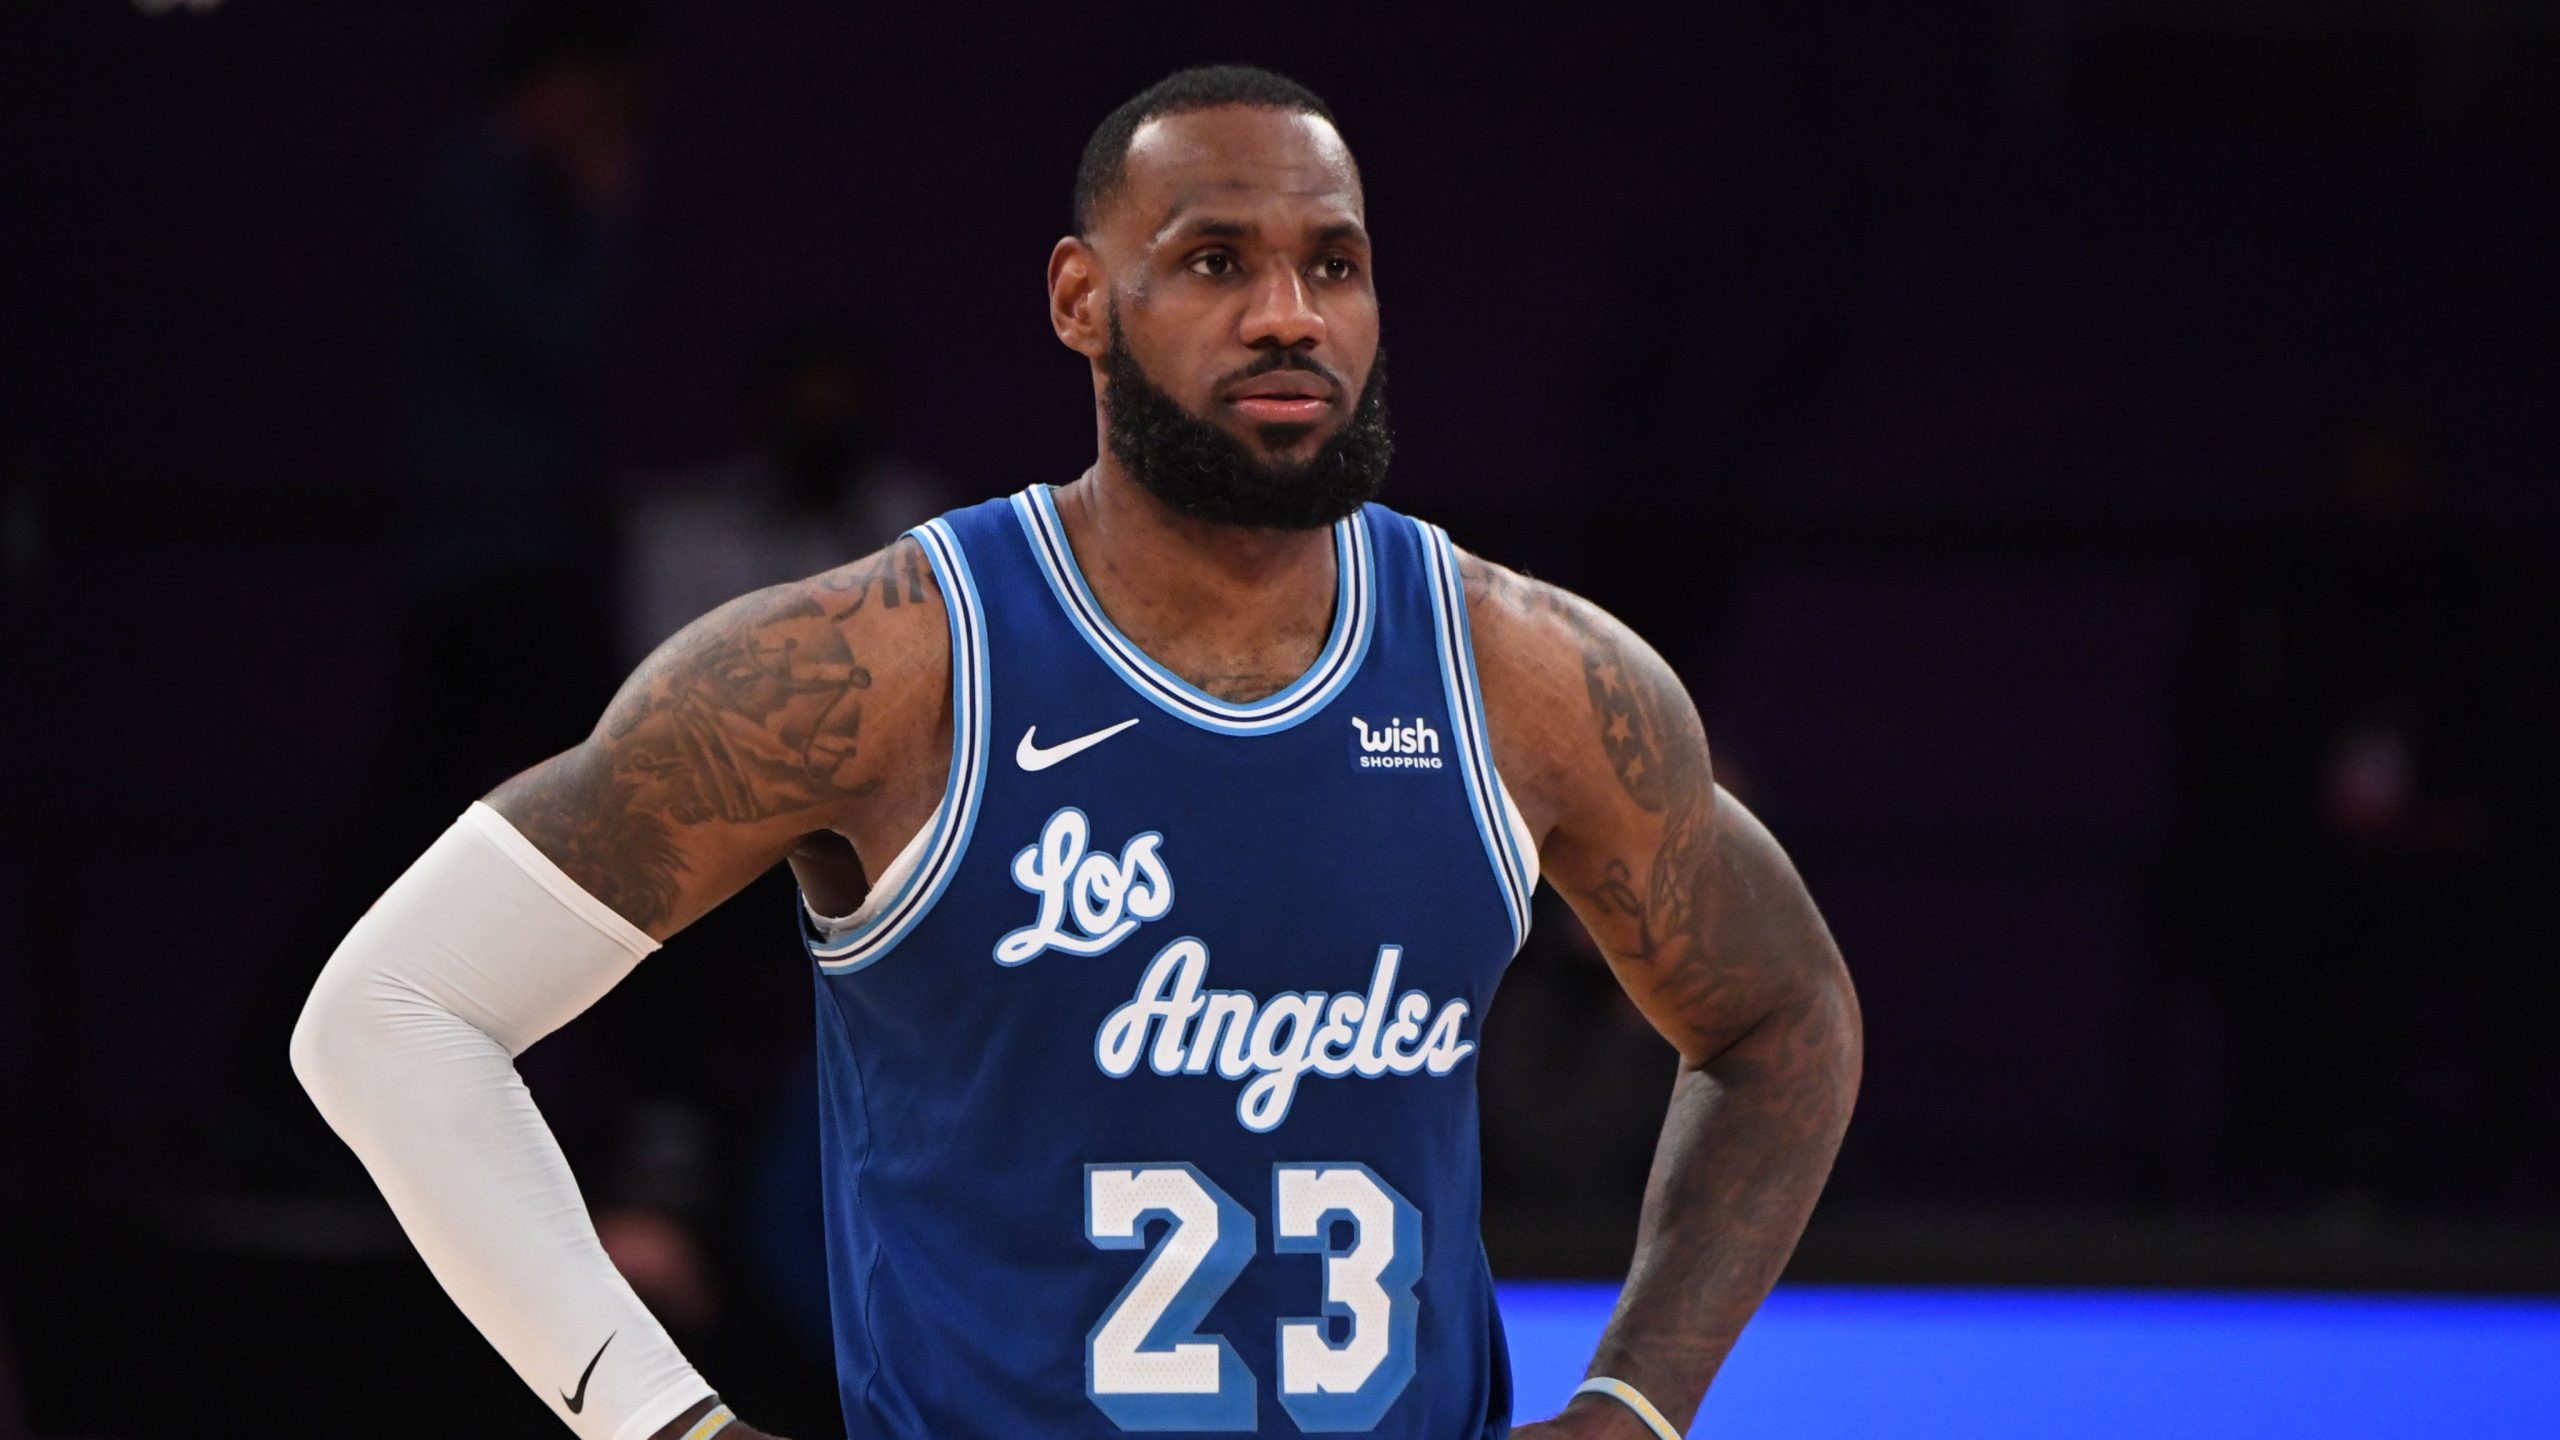 US Olympic squad announced; NBA stars LeBron James, Kevin Durant make the cut